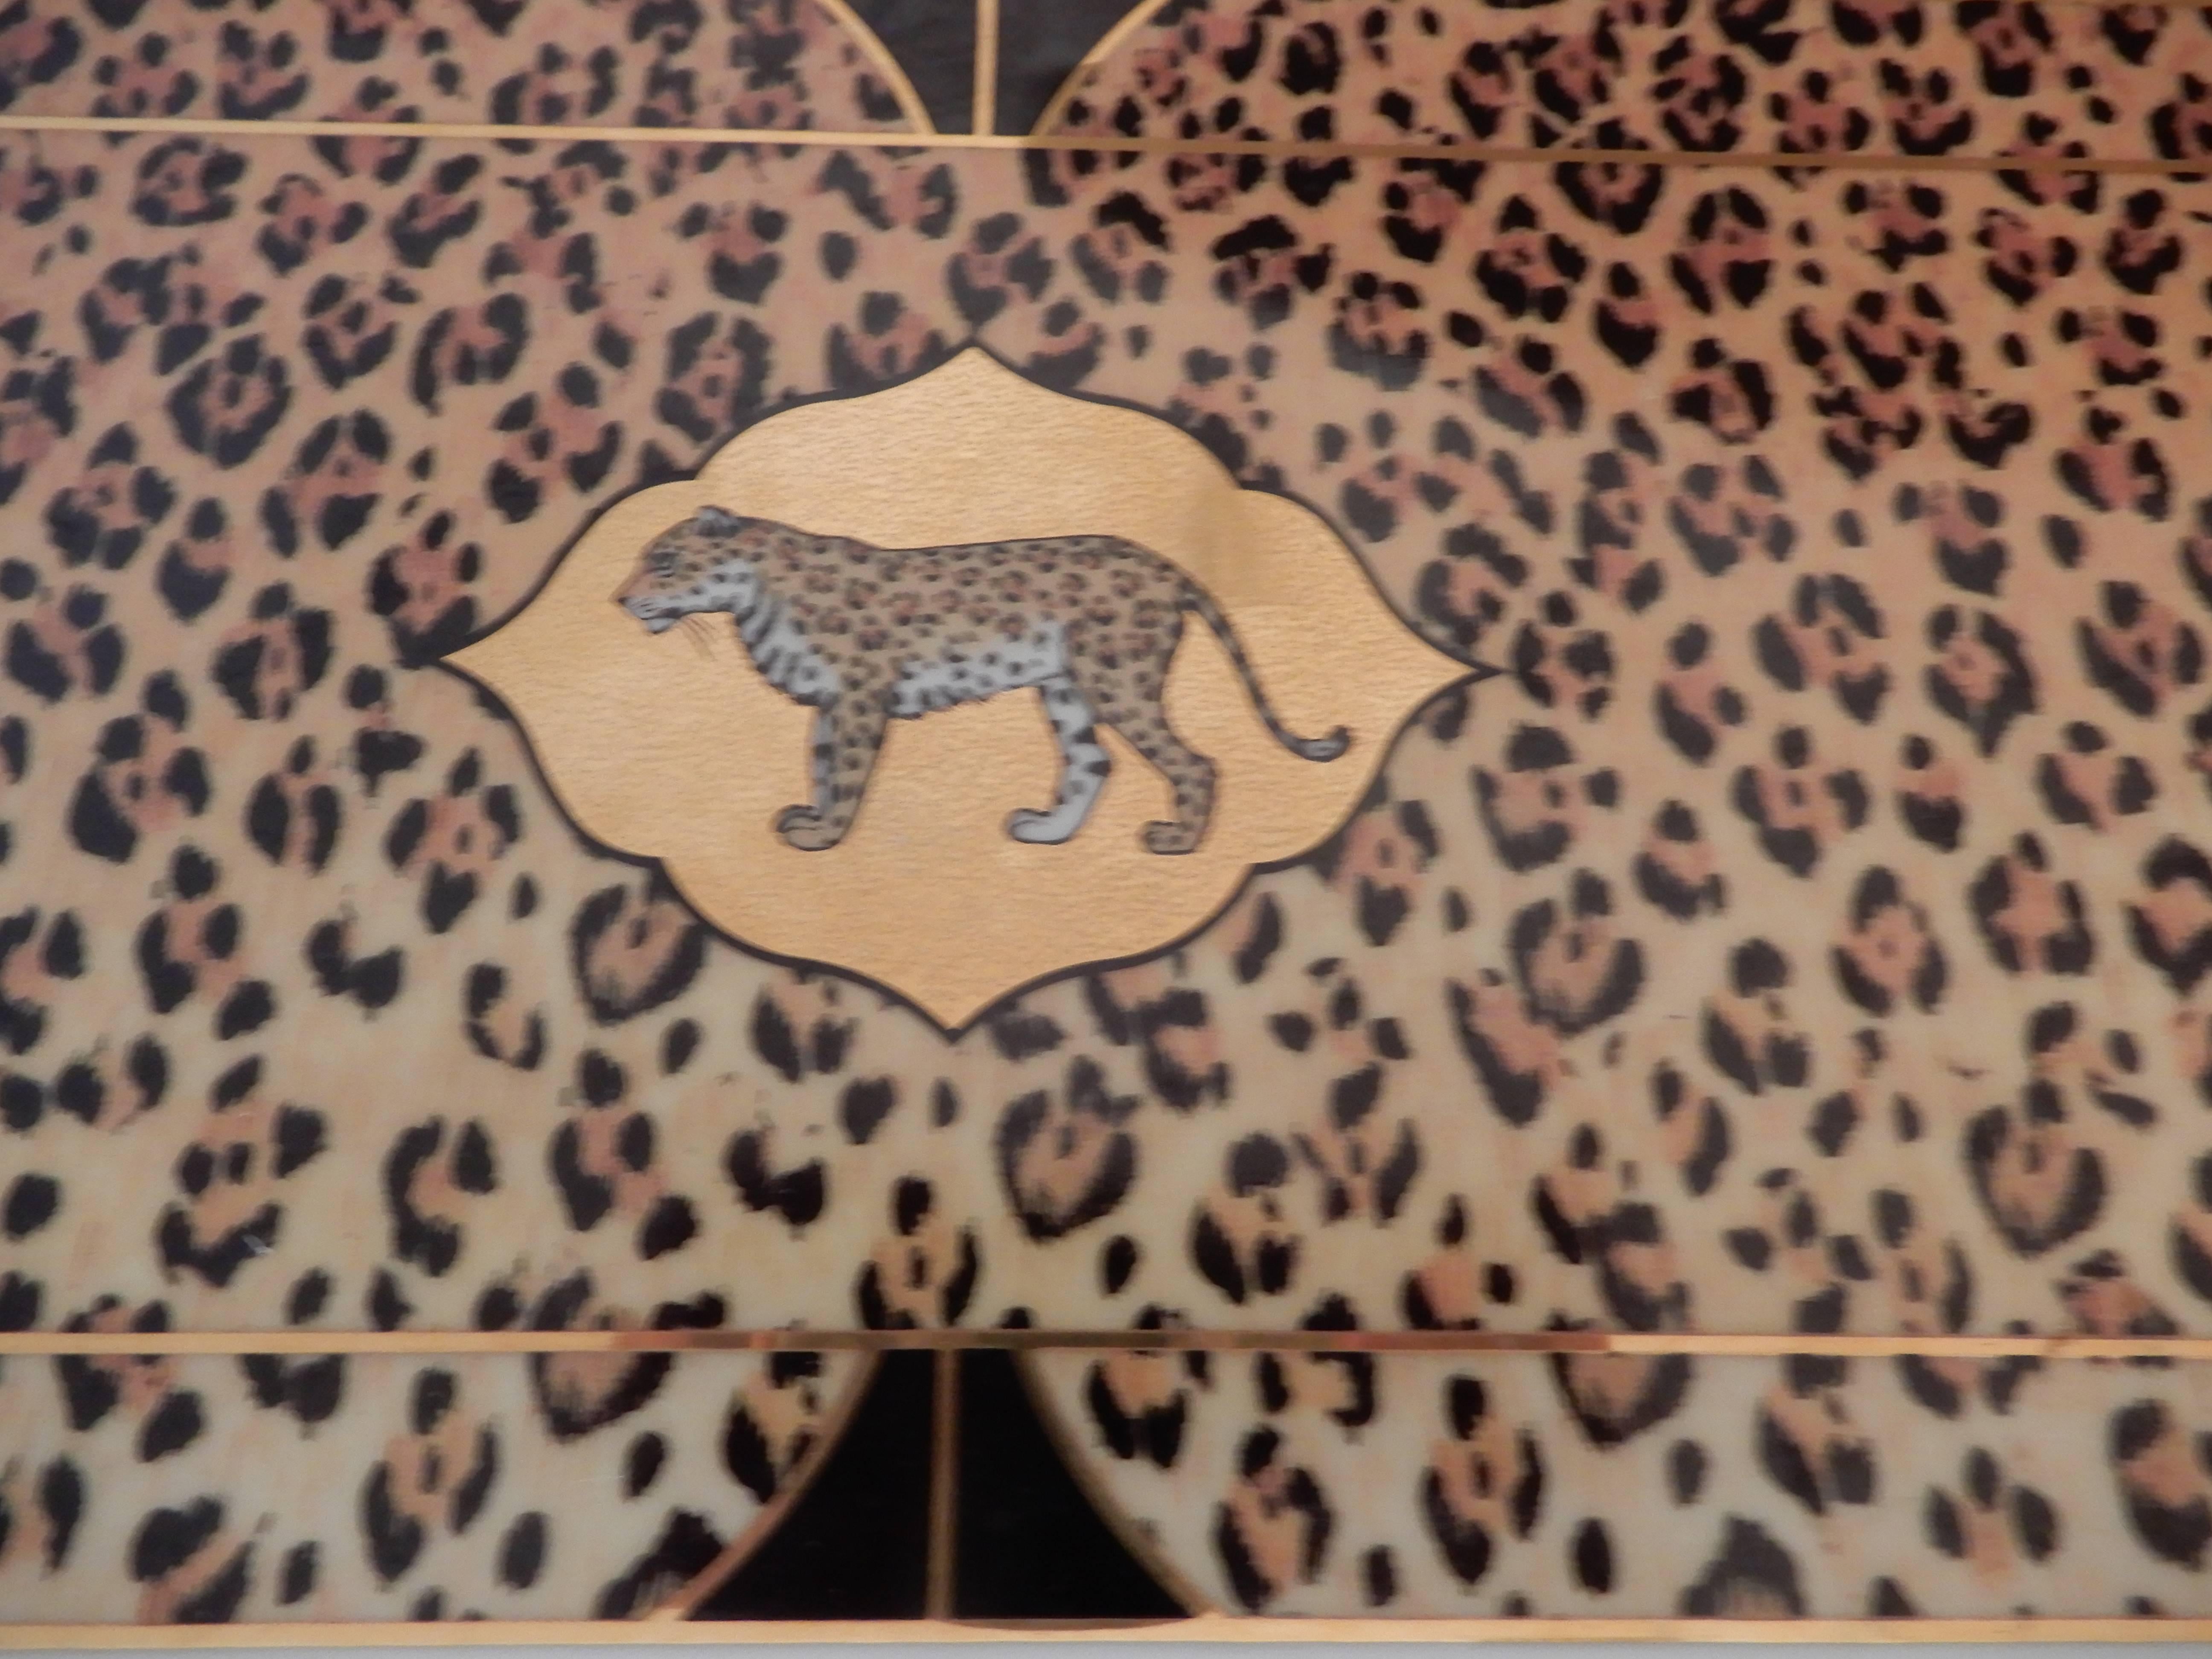 A rare handcrafted chase leopard letter or trinket tray, ceramic and gold leaf.